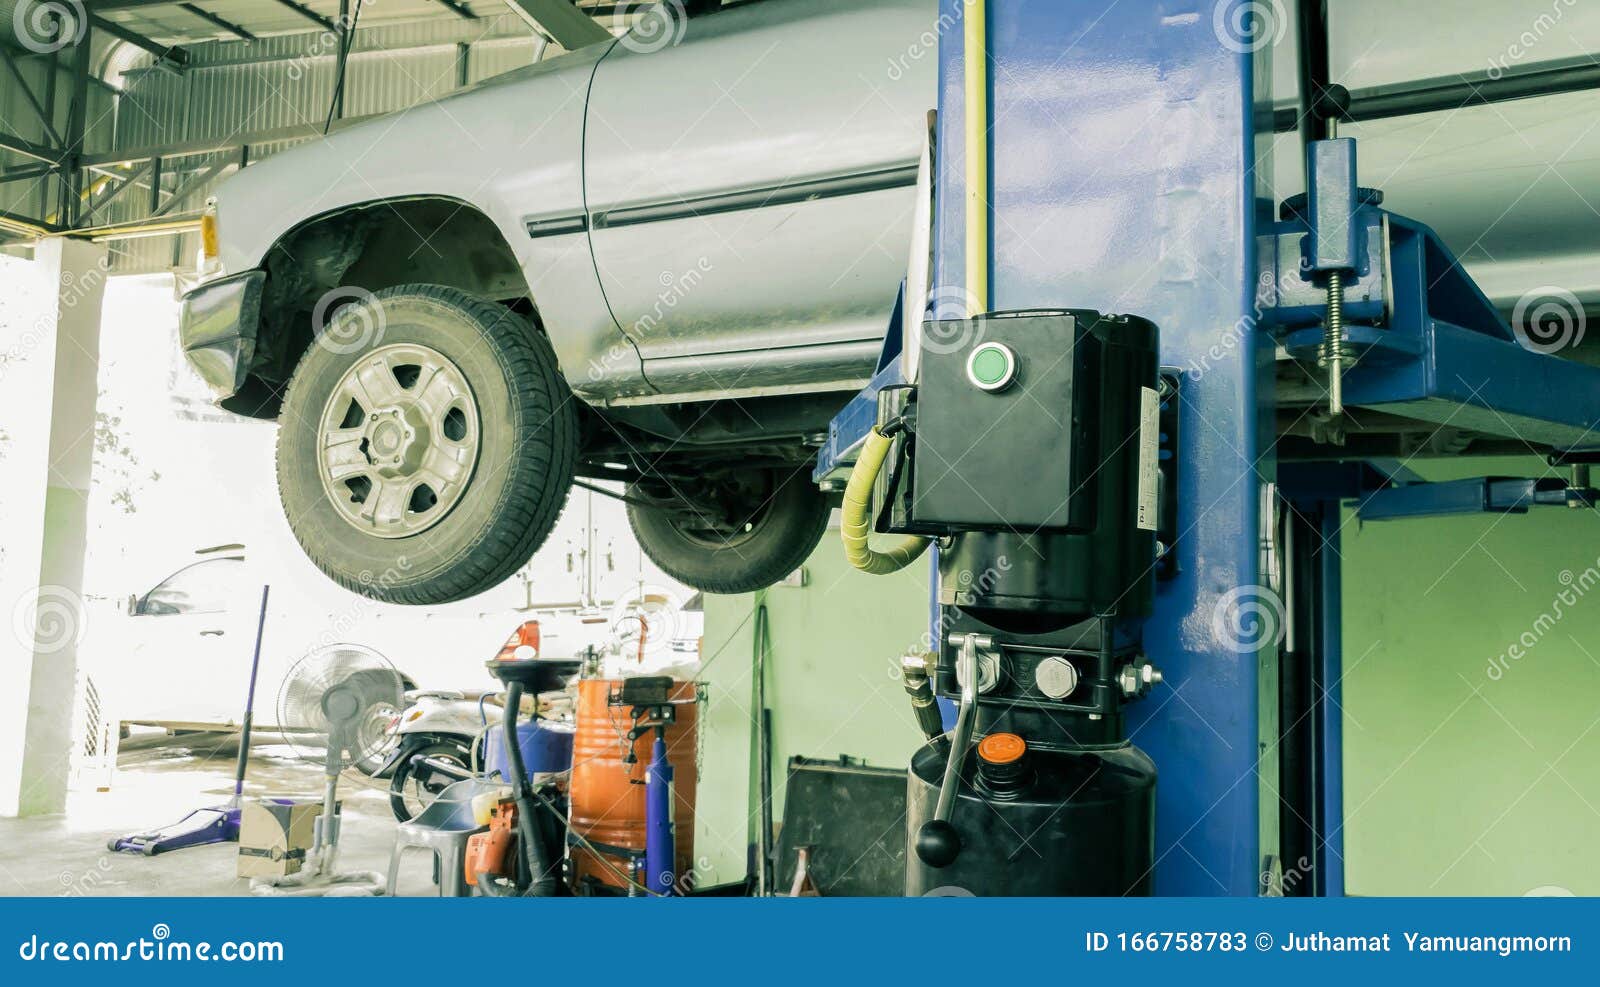 https://thumbs.dreamstime.com/z/car-lifting-auto-industry-machine-service-fixing-repairs-detail-workshop-car-lifting-auto-industry-machine-service-166758783.jpg